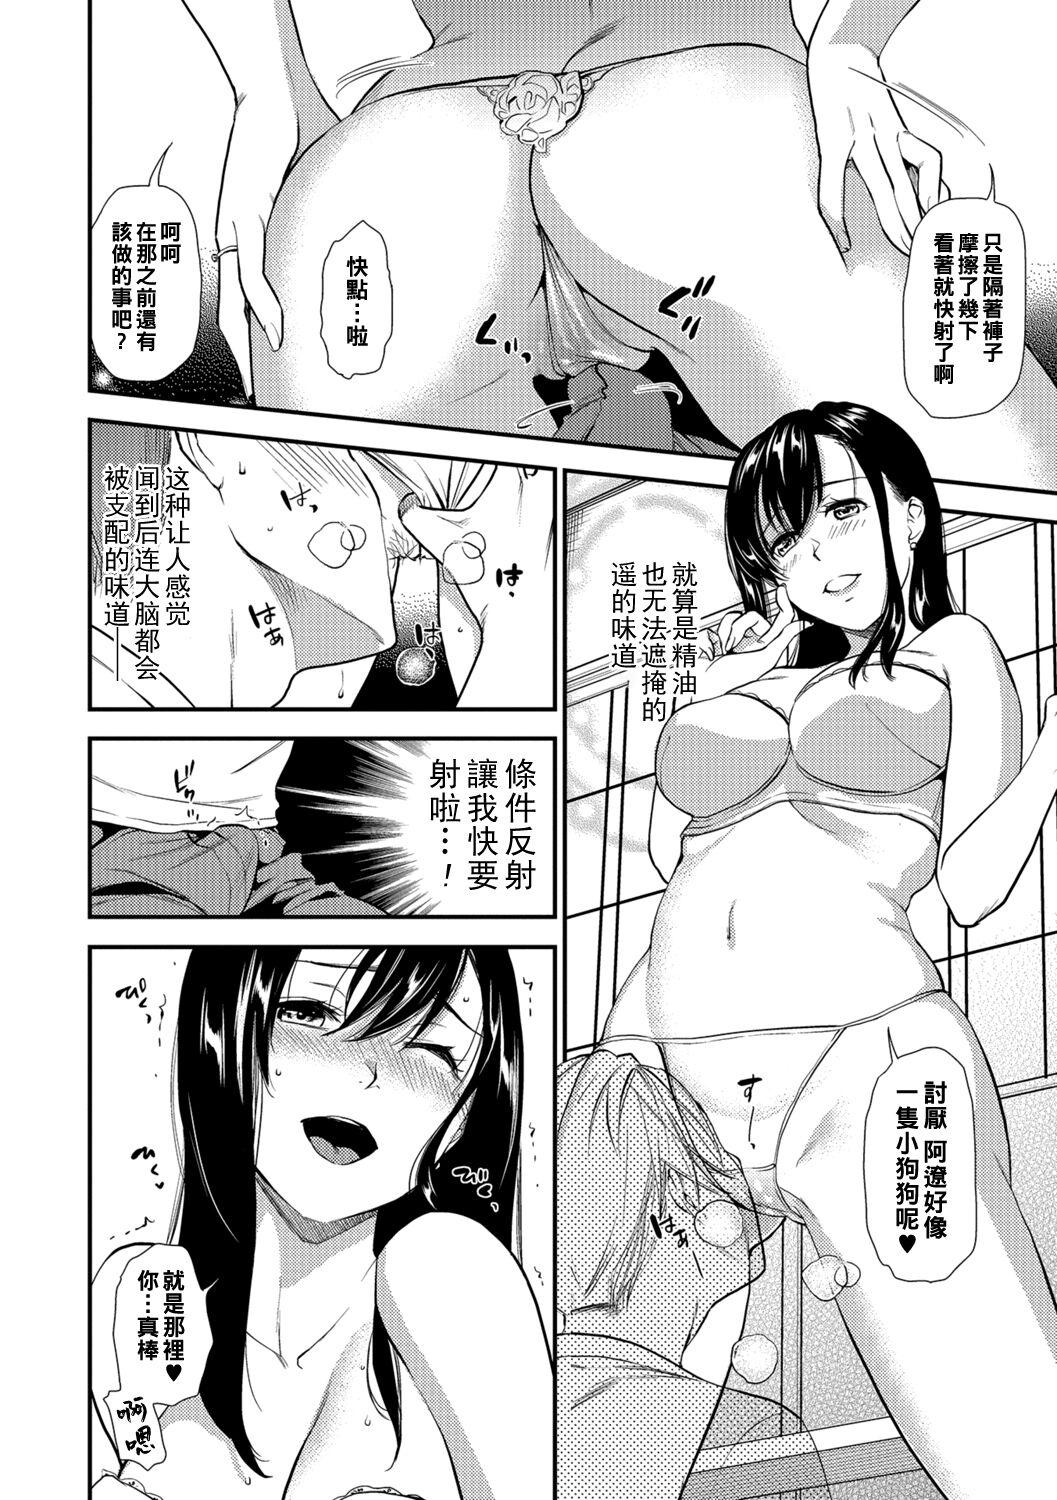 Jerking 新婚前夜（Chinese） With - Page 8